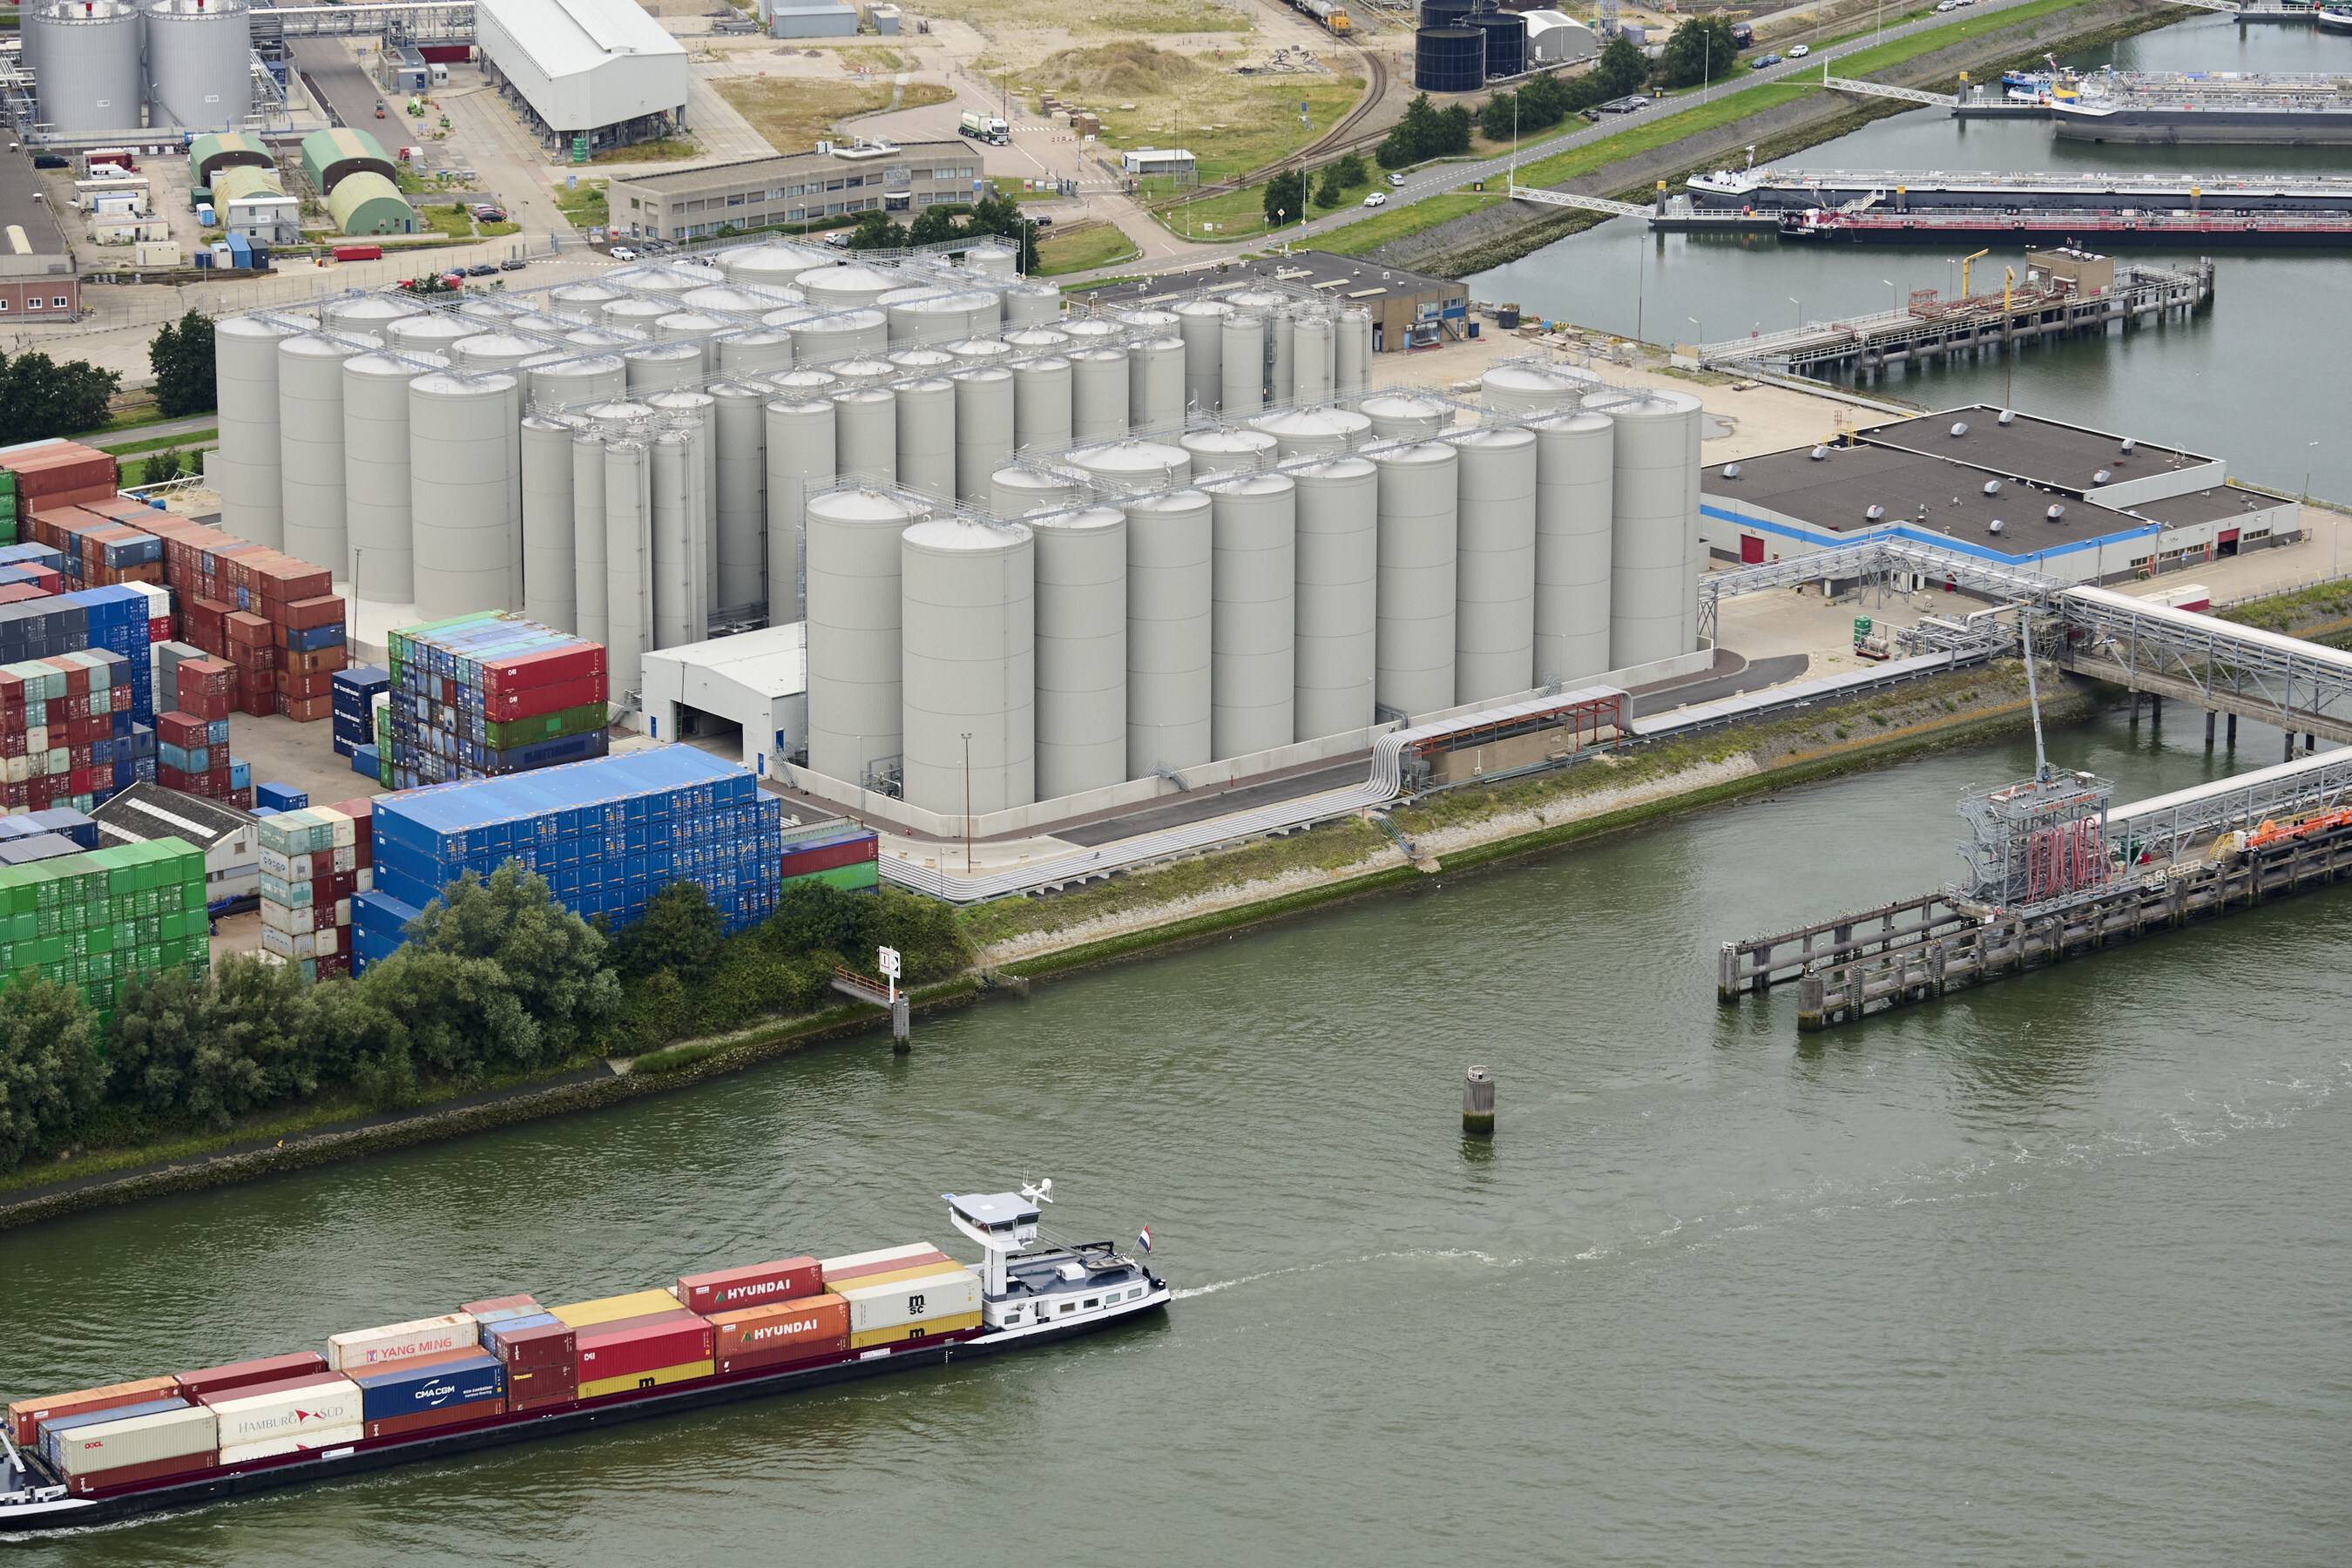 Chane terminal Geulhaven in Rotterdam, The Netherlands. Photo by Chane.